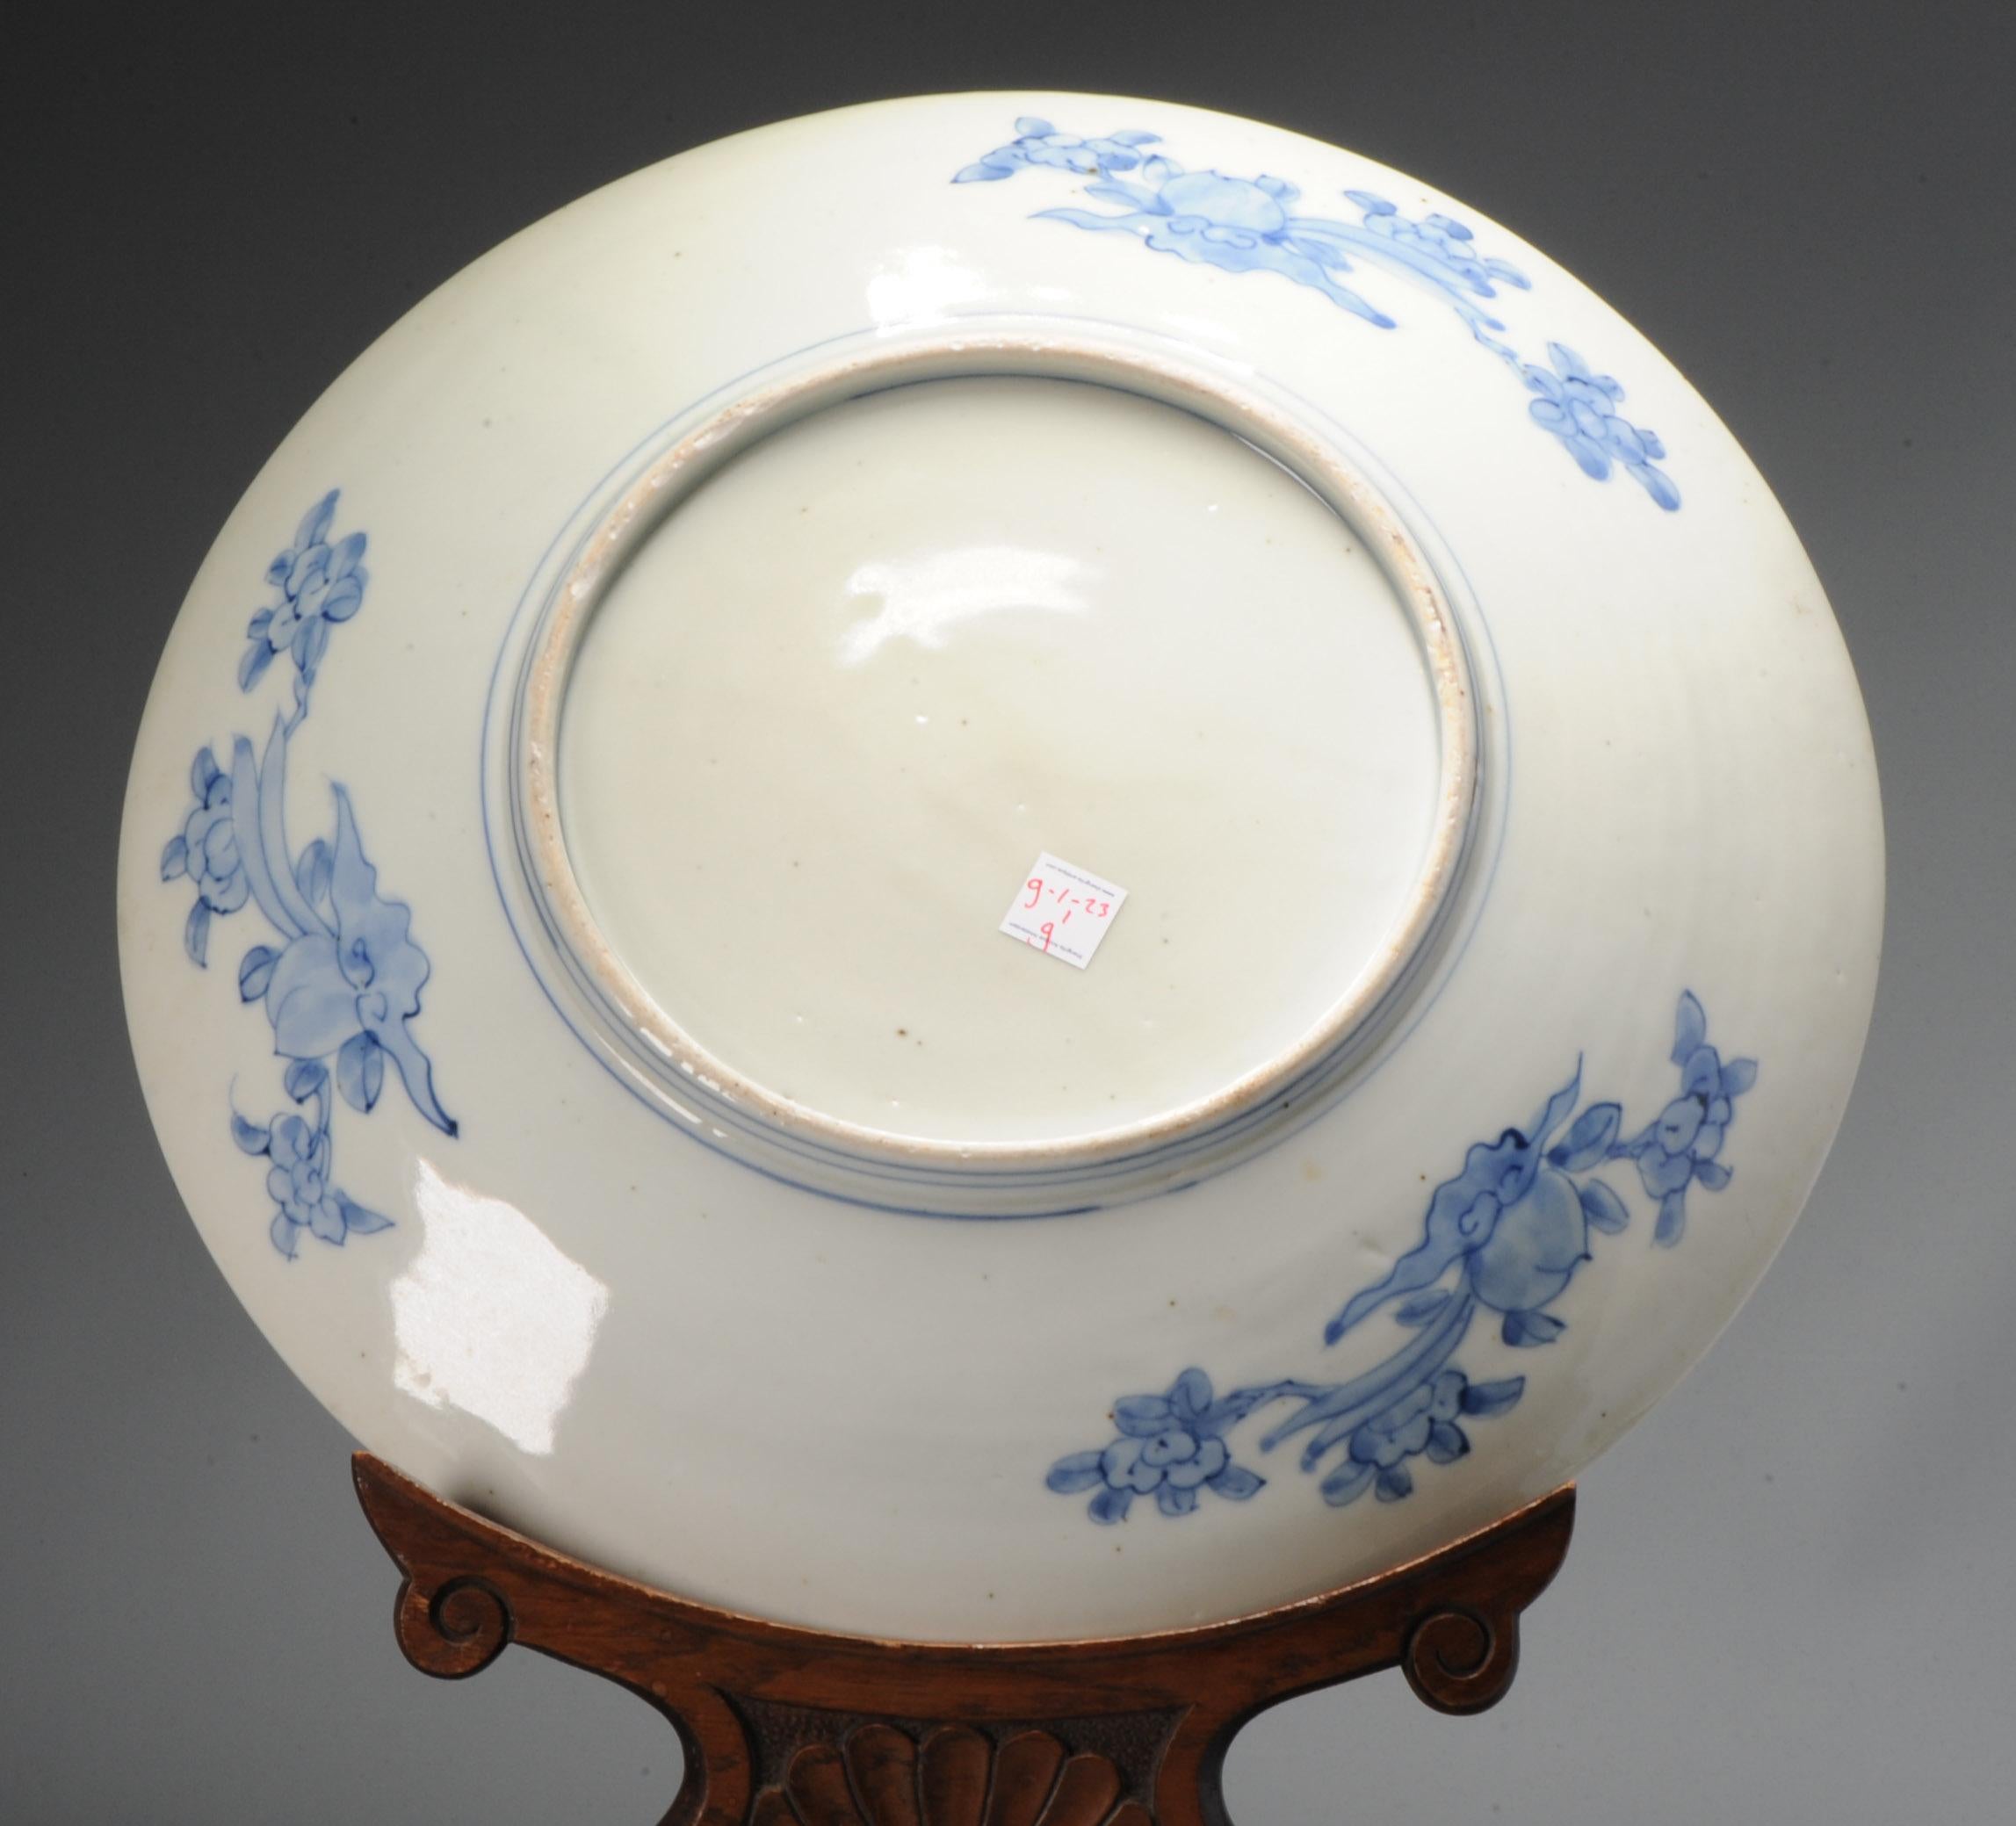 Antique Meiji Period 19 / 20C Japanese Porcelain Swan/Geese Charger Arita For Sale 1